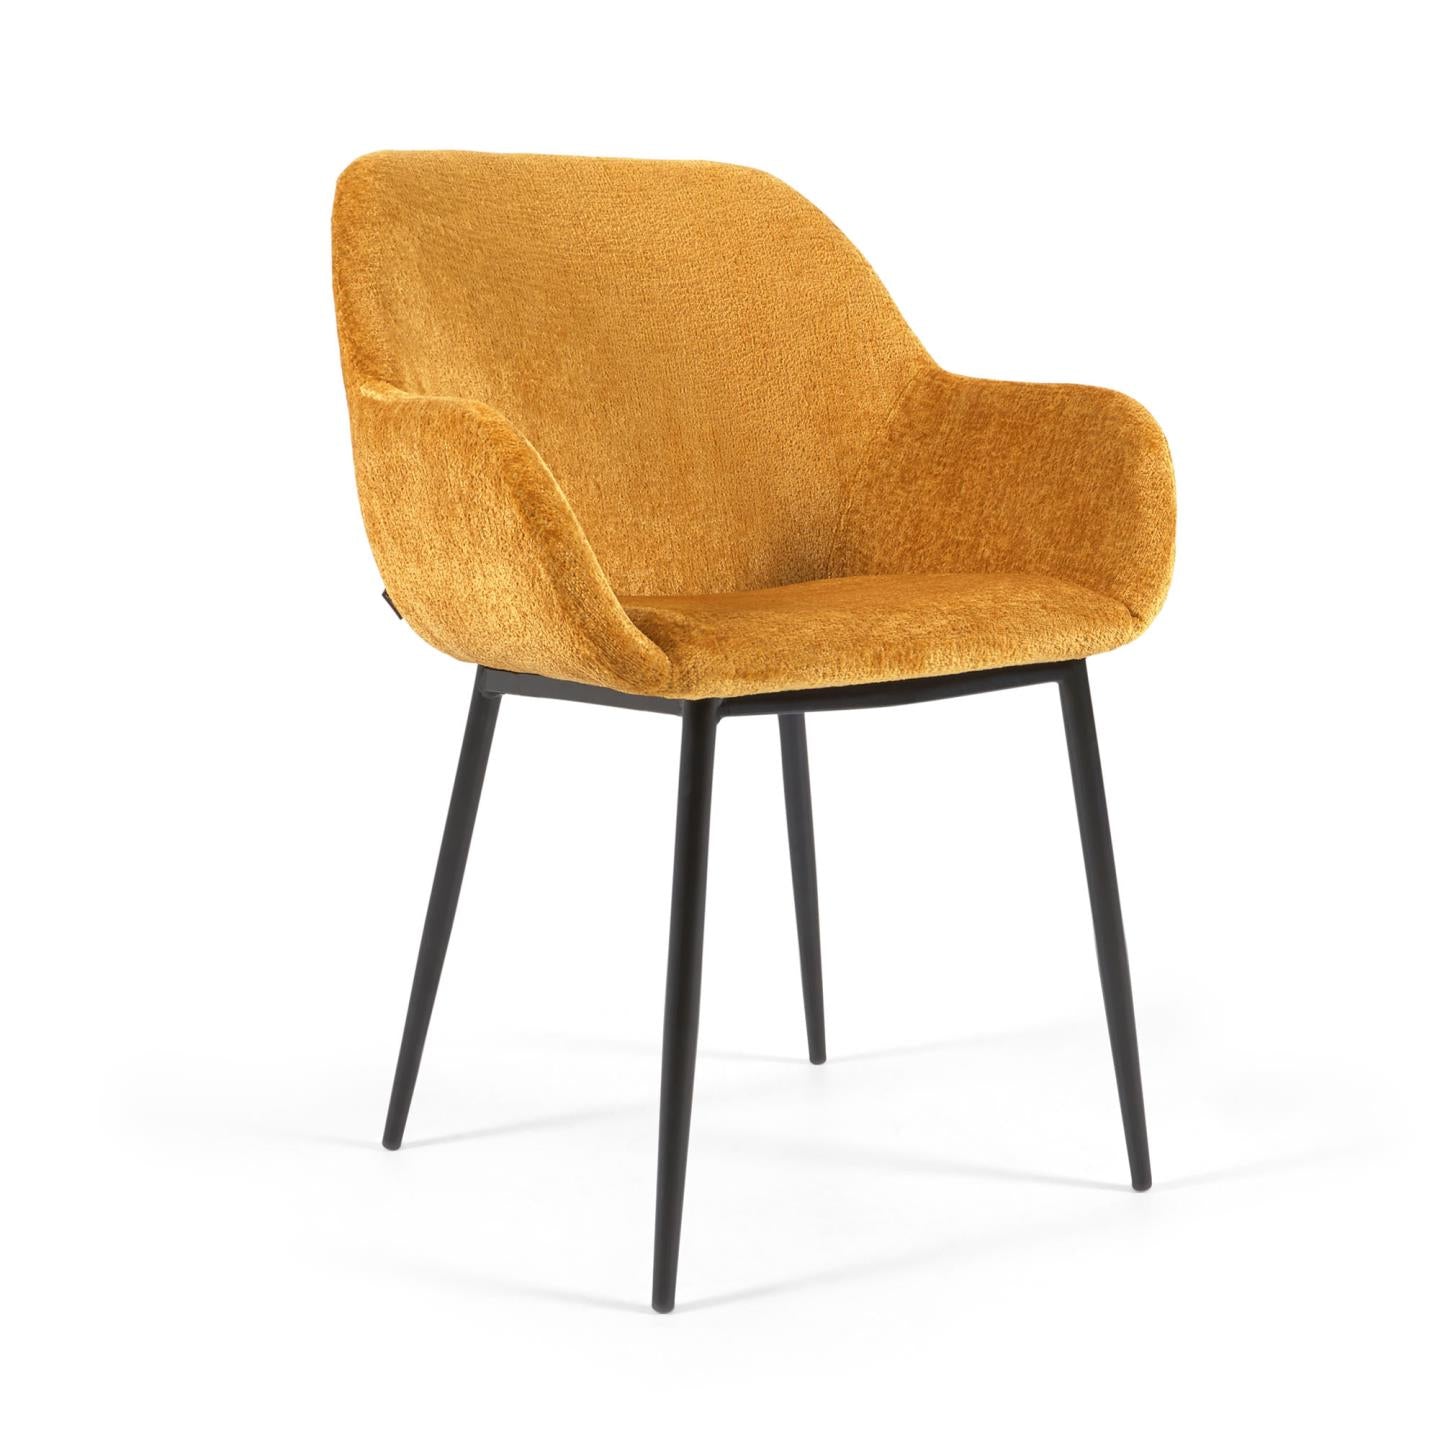 Konna chair in mustard chenille with steel legs and painted black finish